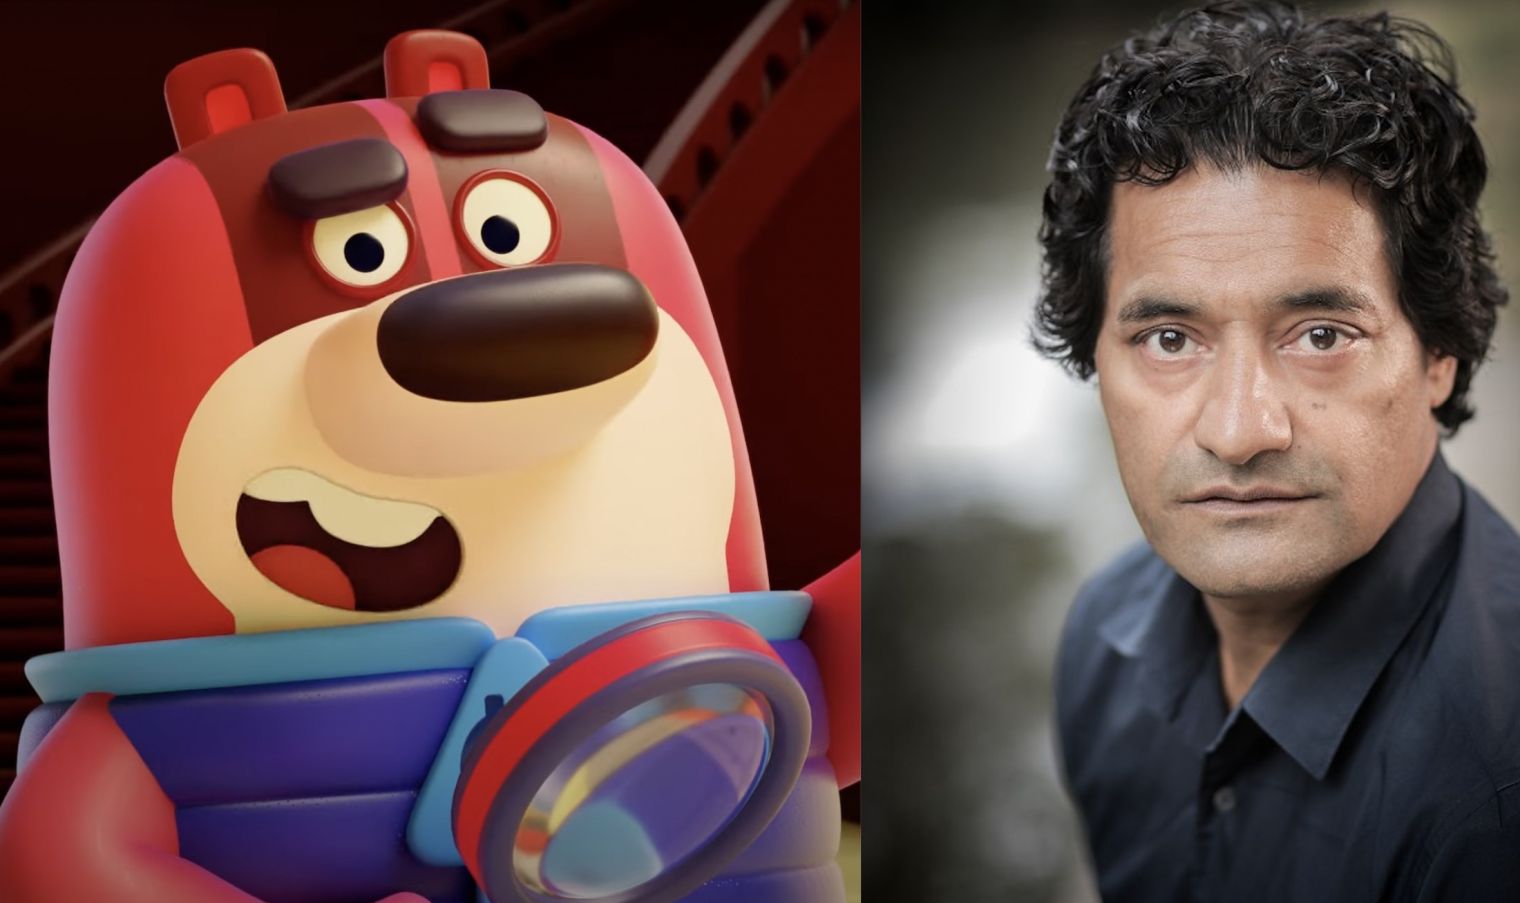 Narinder Samra stars as the voice of Detective Stripes in new pre-school animation series Big Tree City